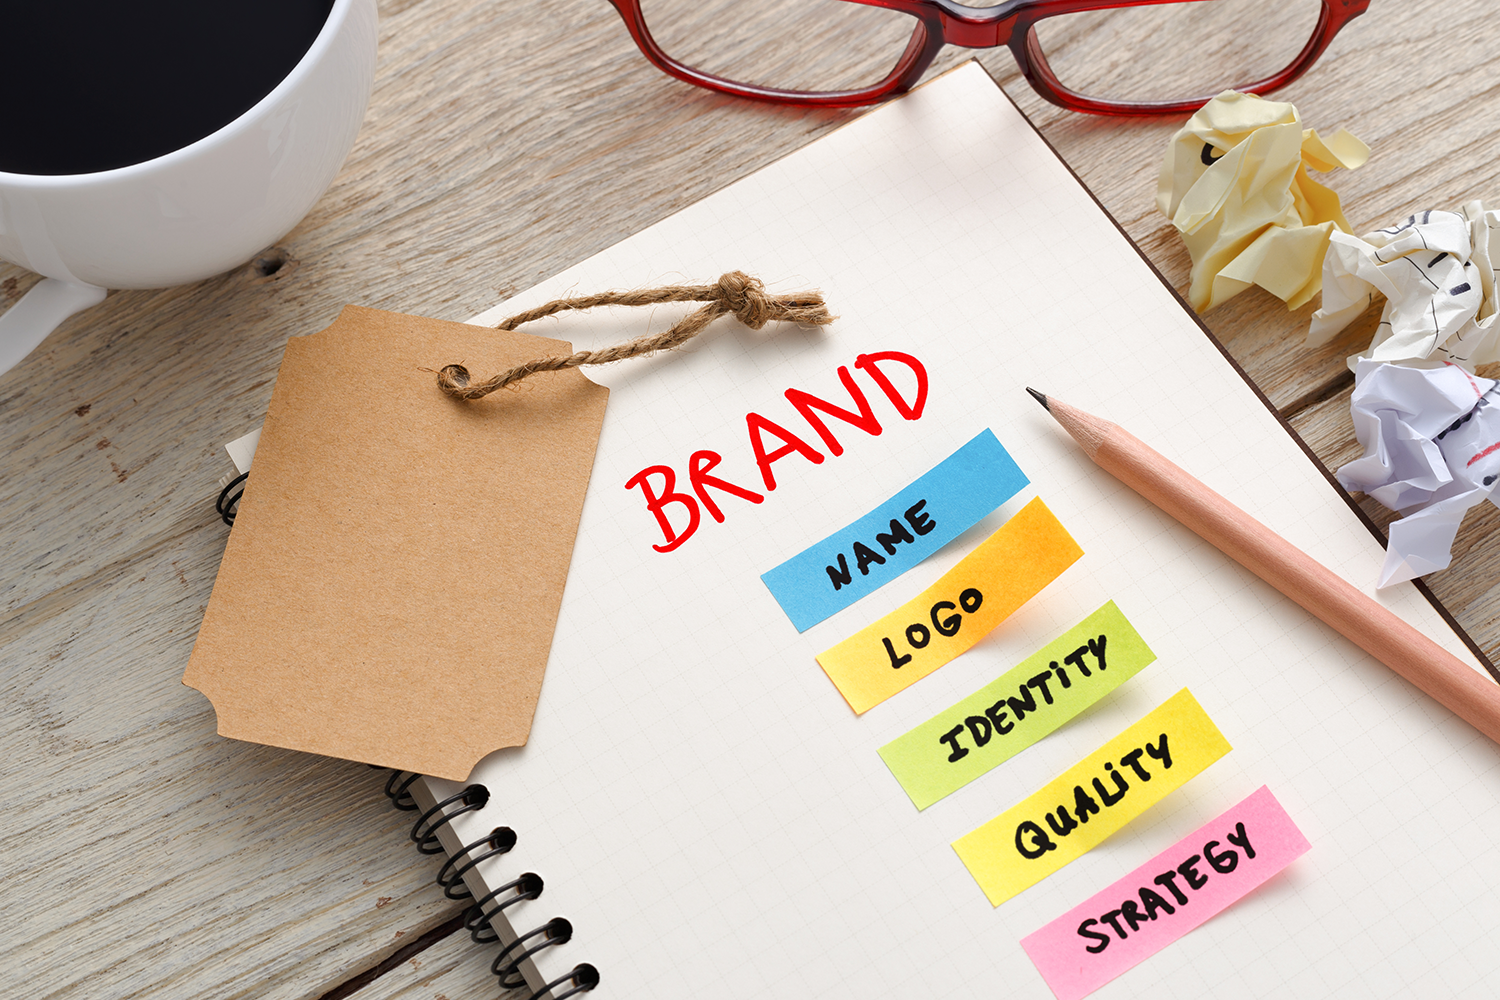 Brands - Does Yours Measure Up?